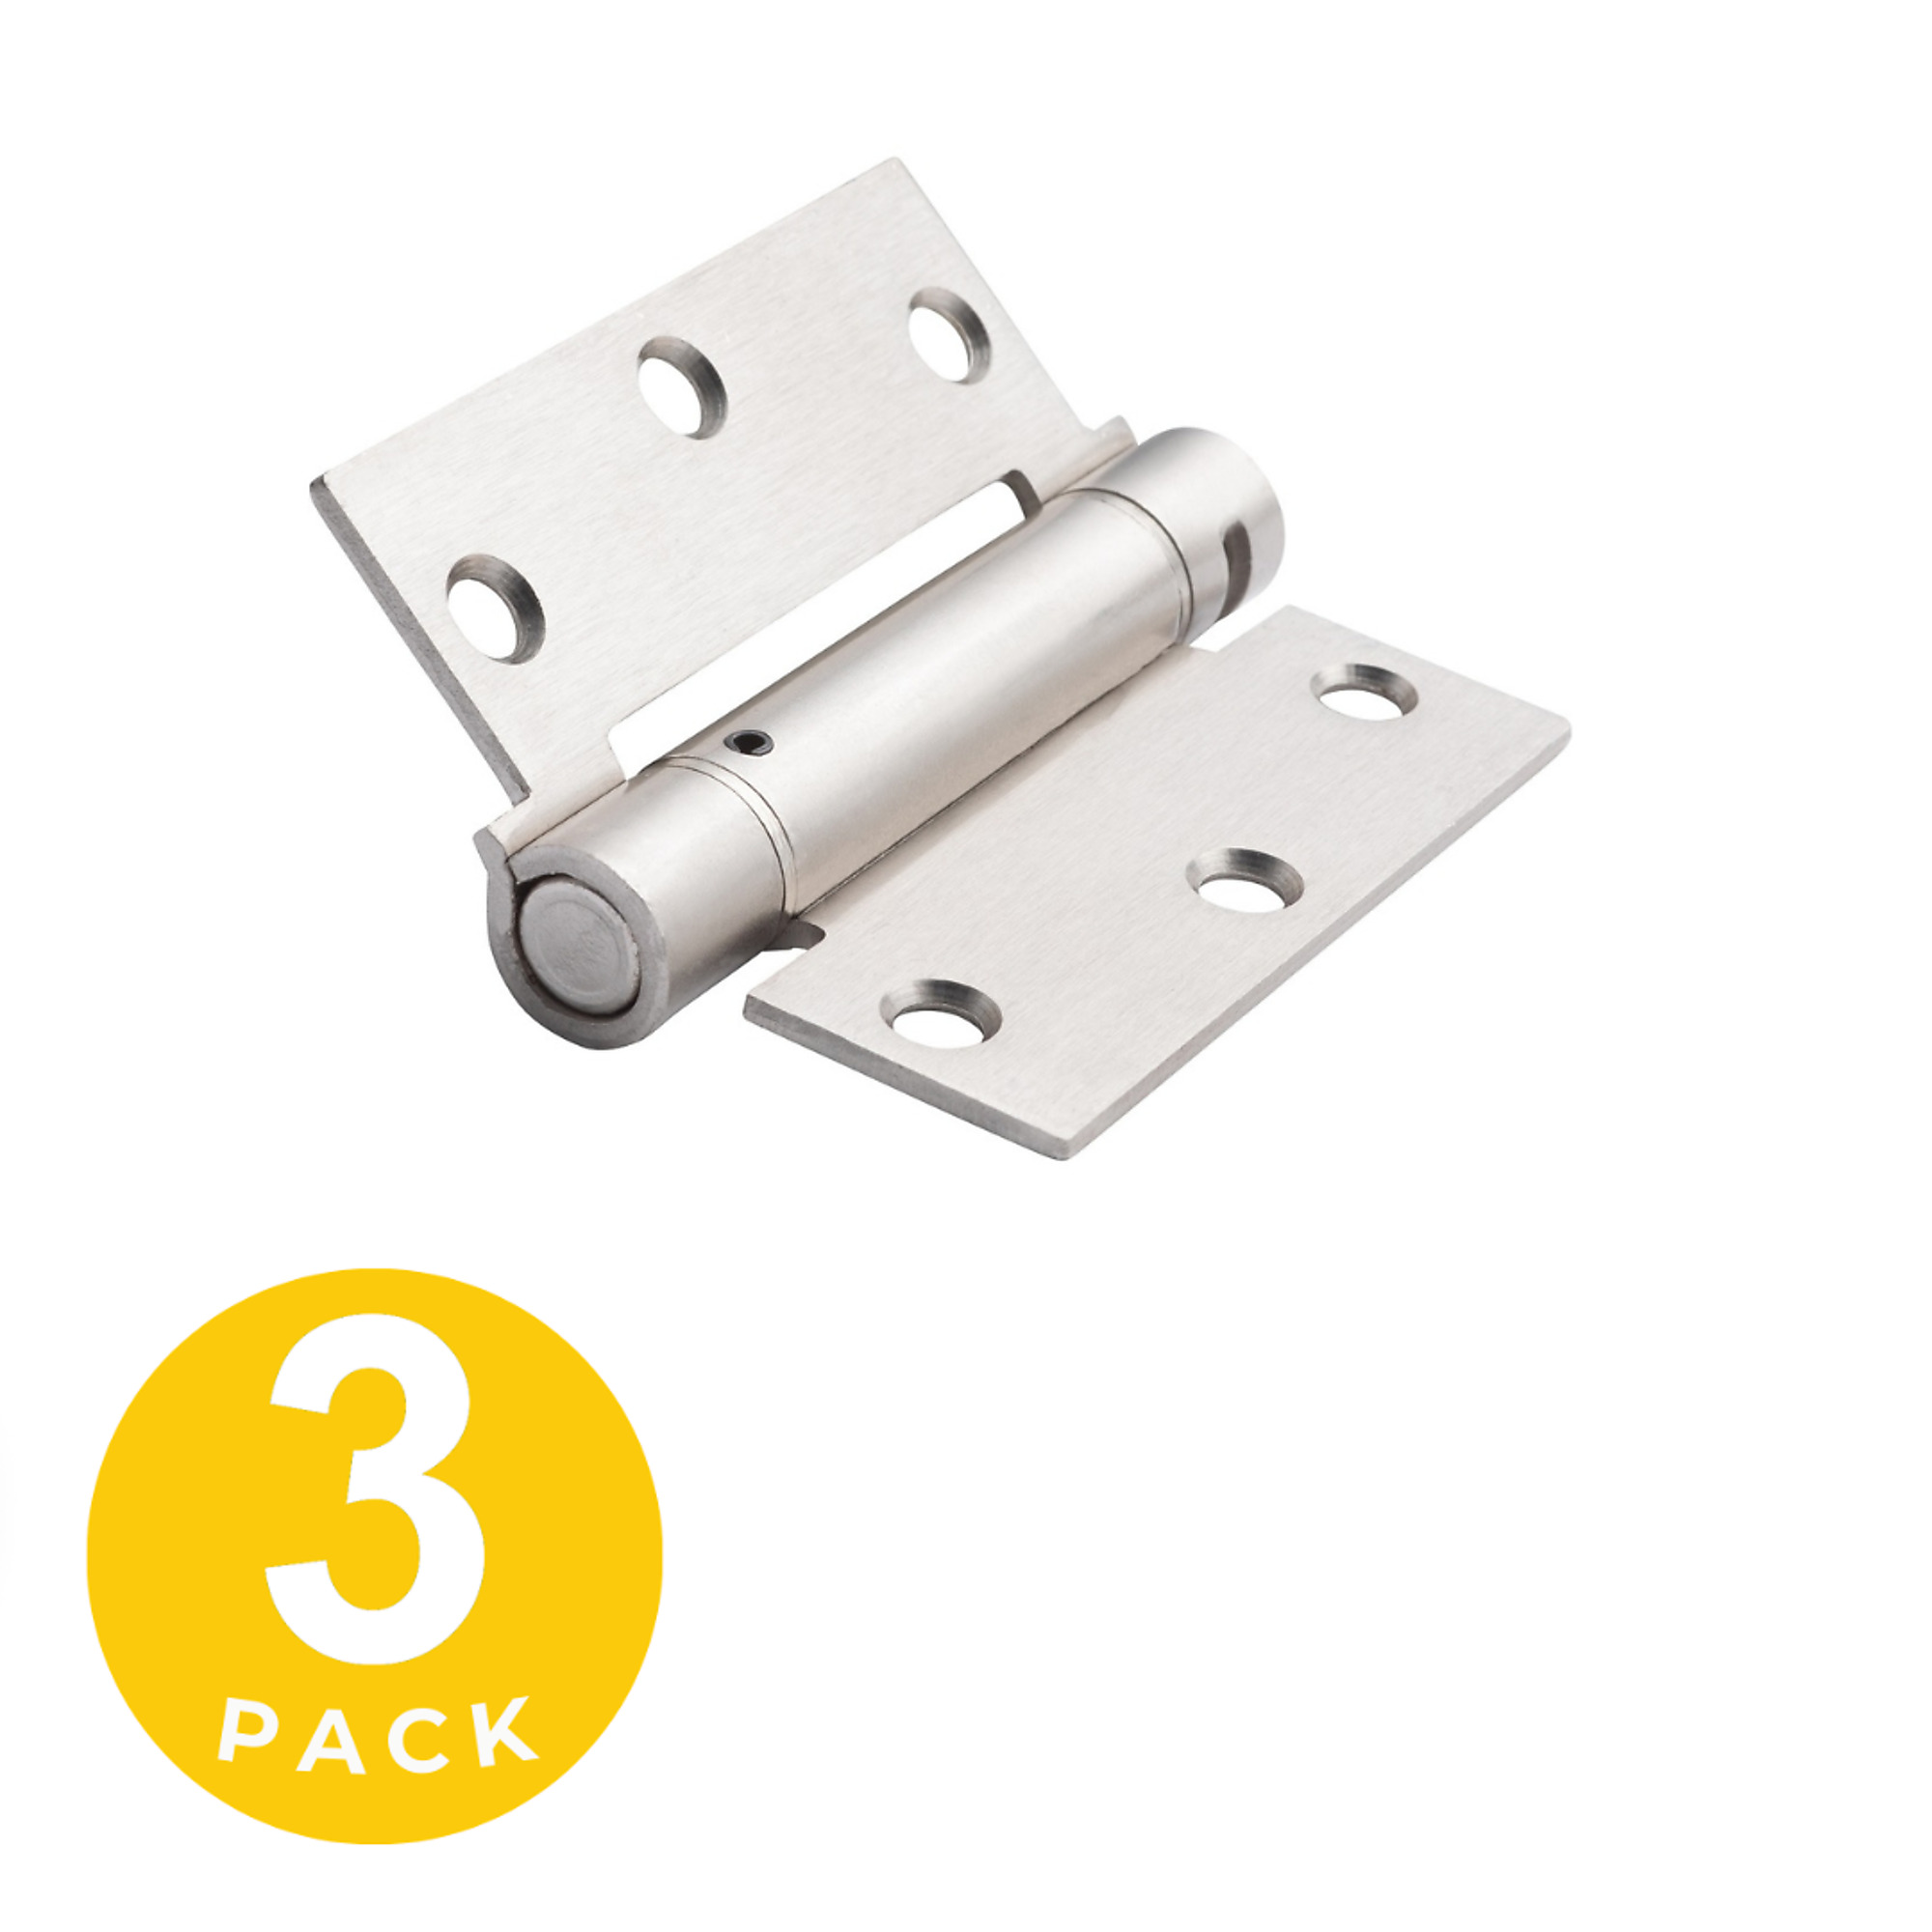 Global Door Controls, Full Mortise Spring With Non-Removable Pin Hinge - Set of 3 Model CPS3535-US15-3